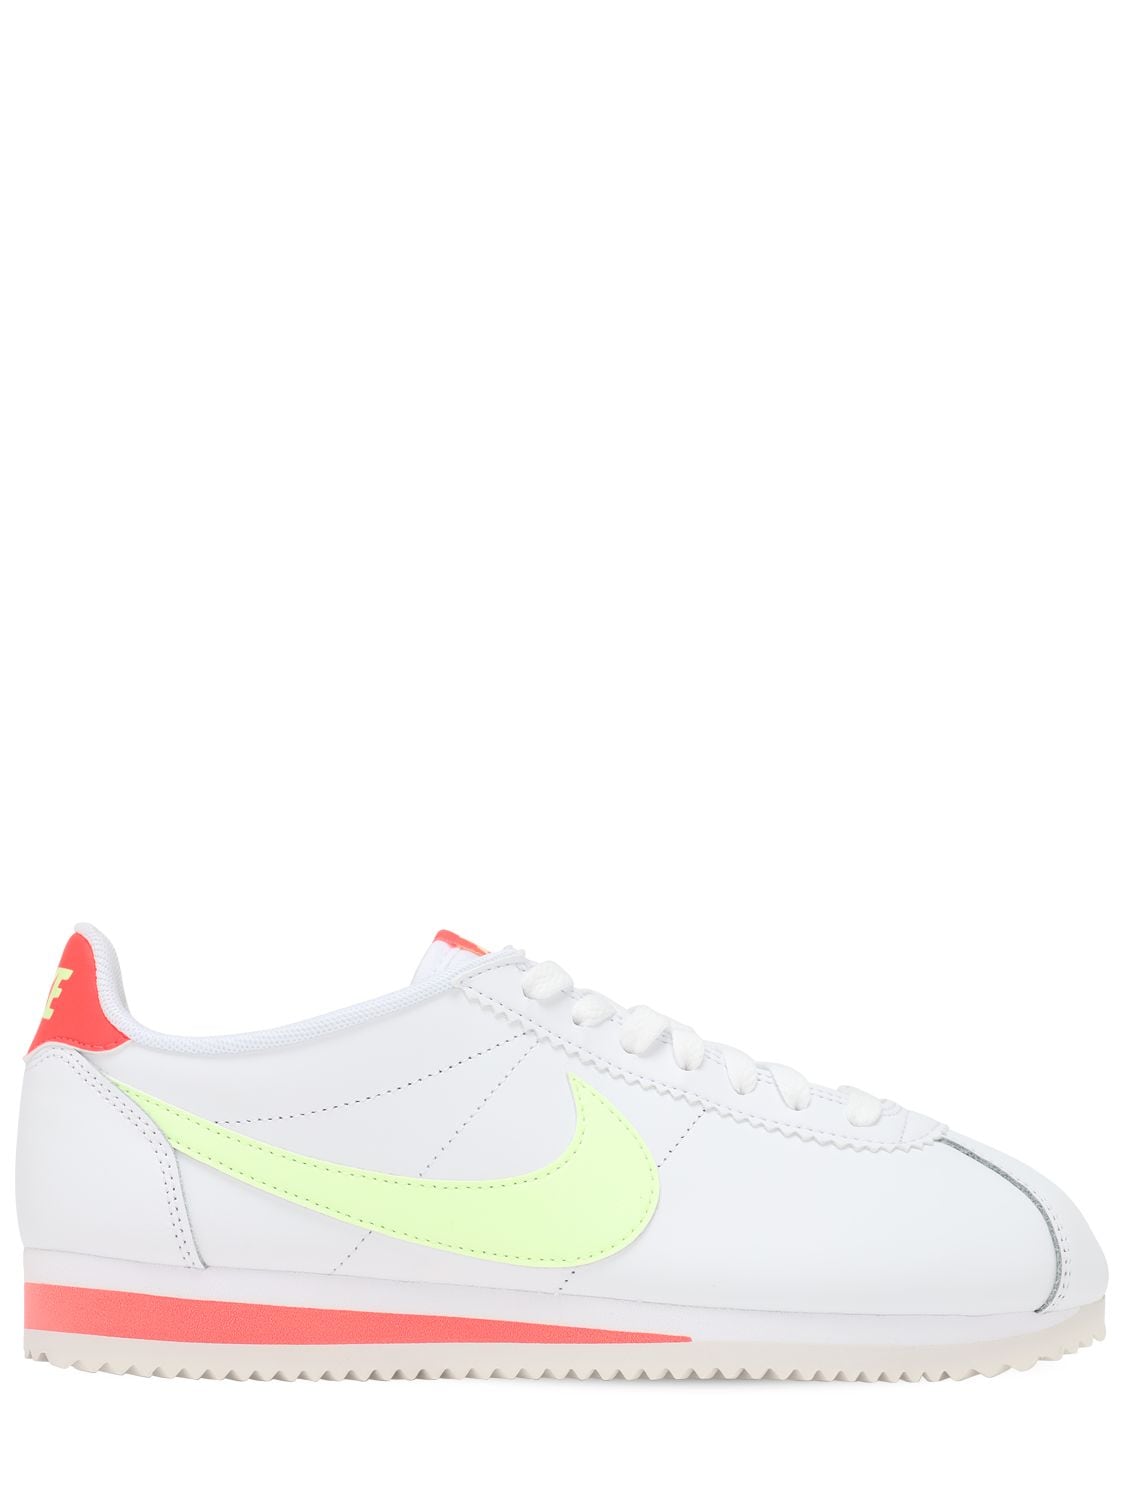 Nike Classic Cortez Og Sneakers In White